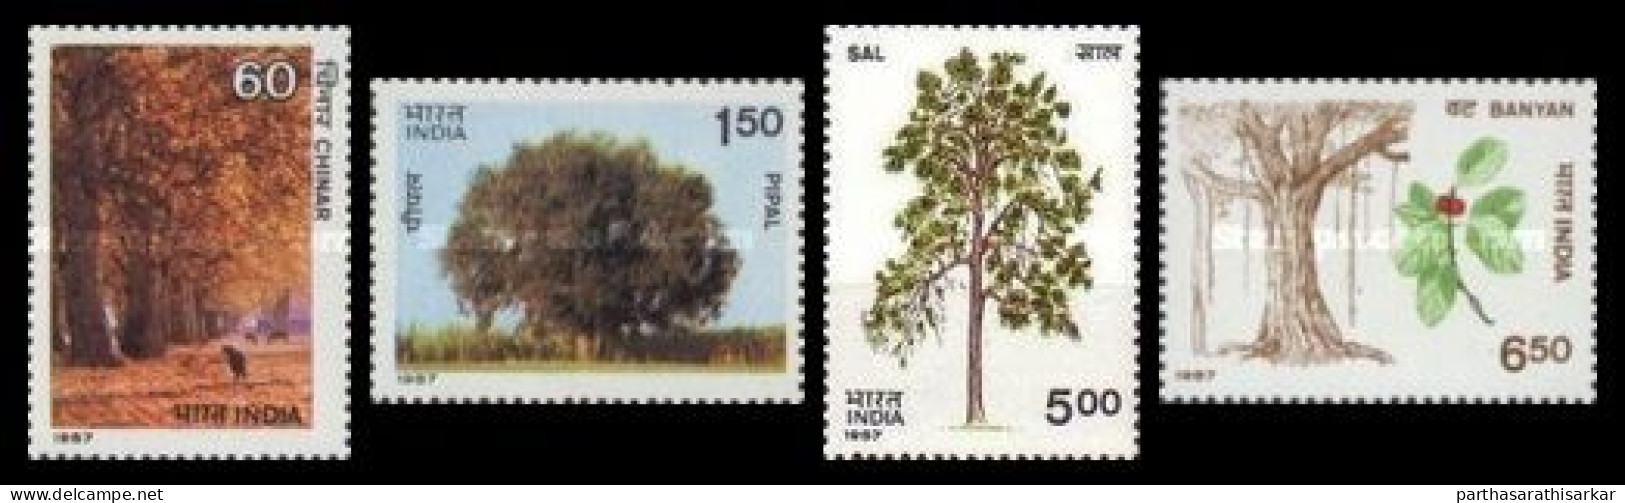 INDIA 1987 INDIAN TREES NATURE COMPLETE SET MNH - Nuevos